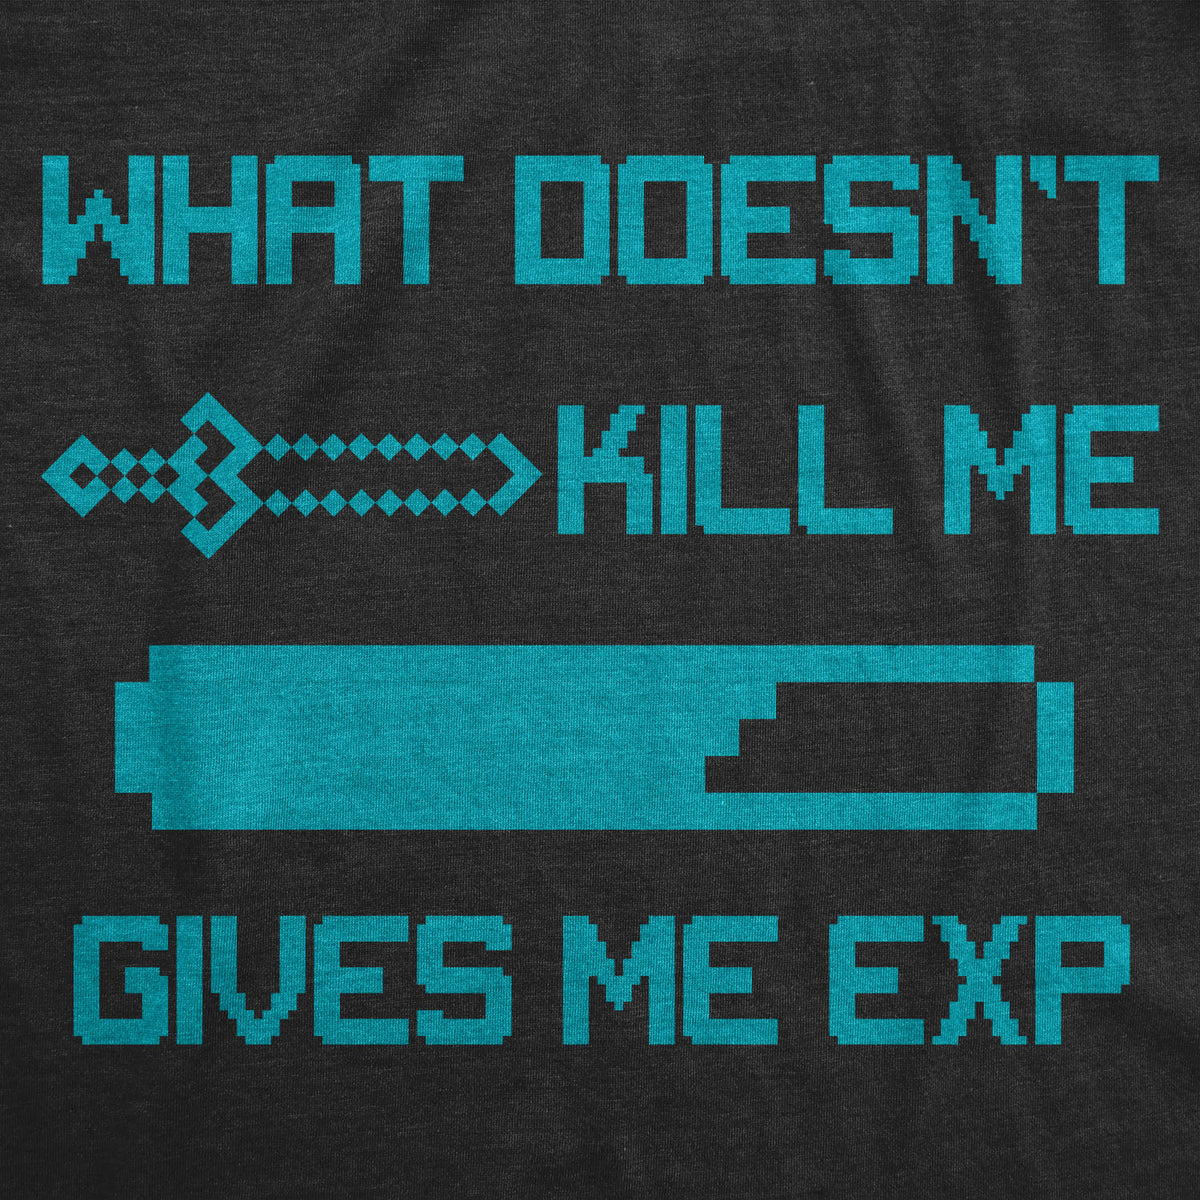 Mens What Doesnt Kill Me Gives Me EXP T shirt Funny Nerd Video Game Geeky Gift